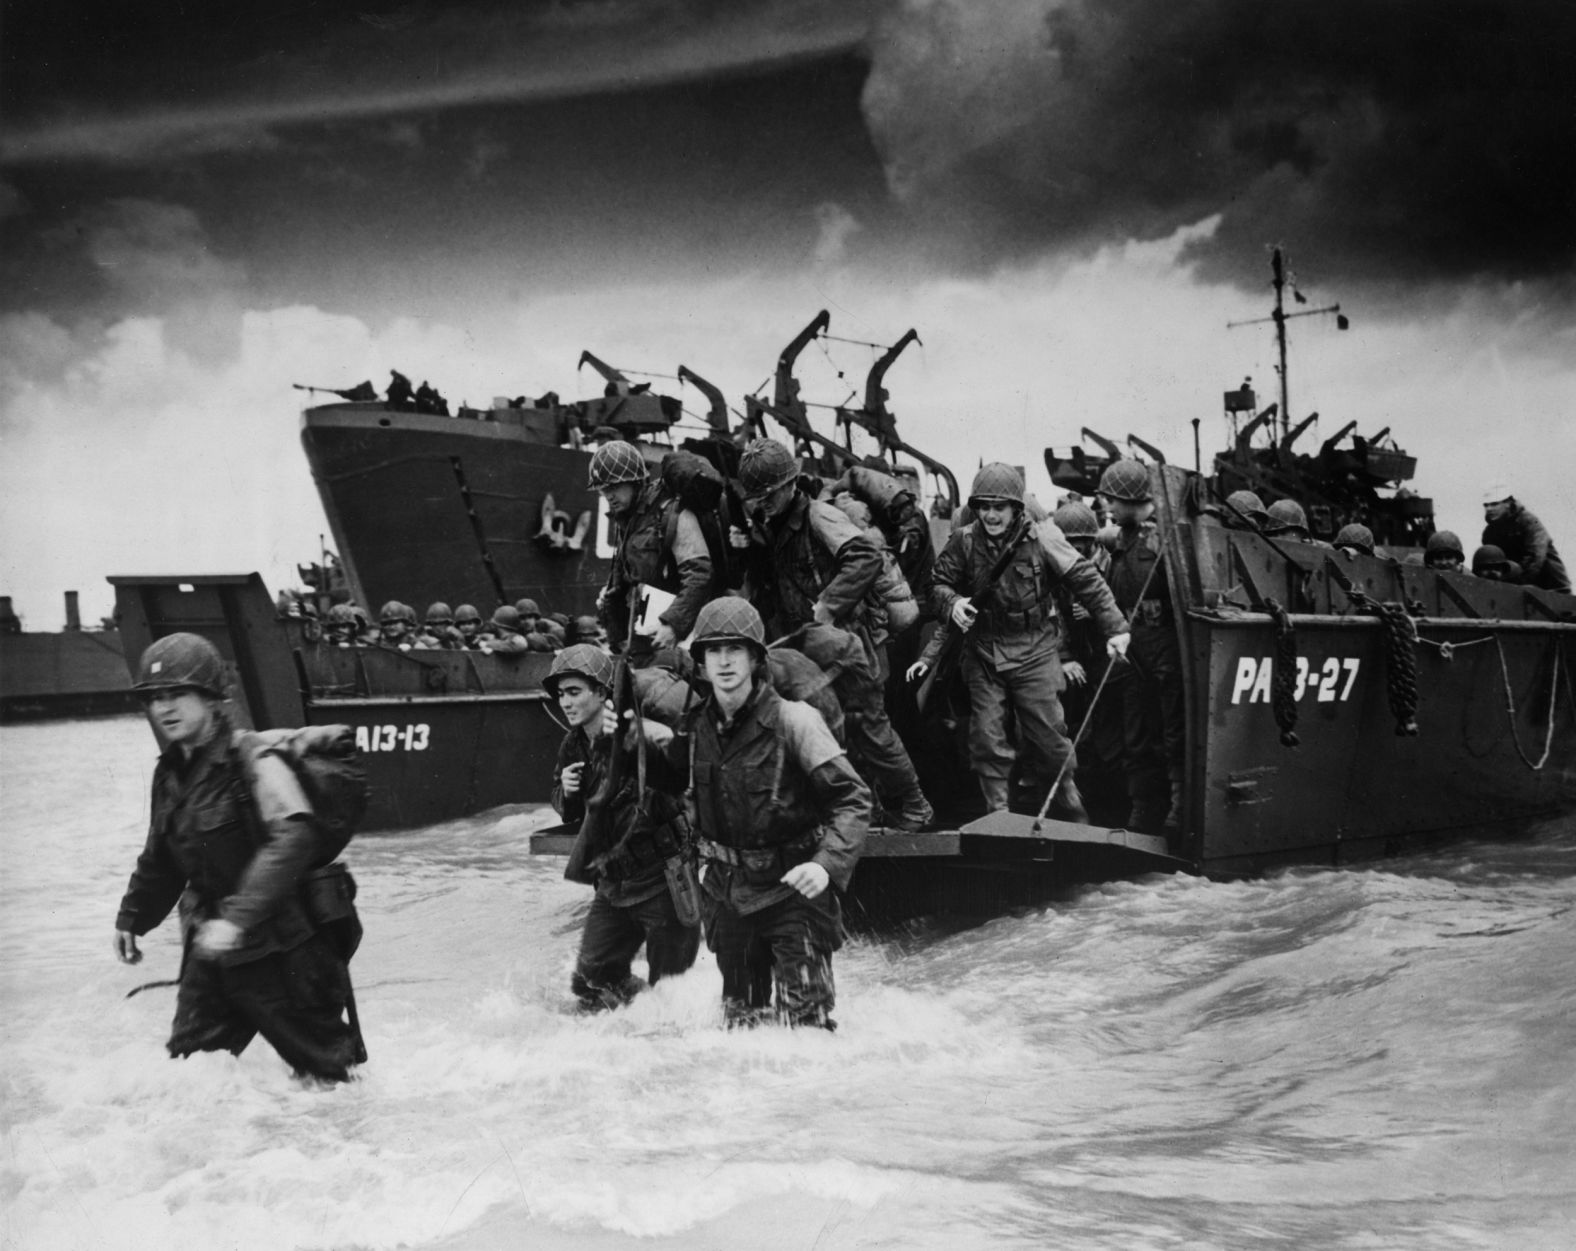 Reinforcements disembark from boats at Normandy.